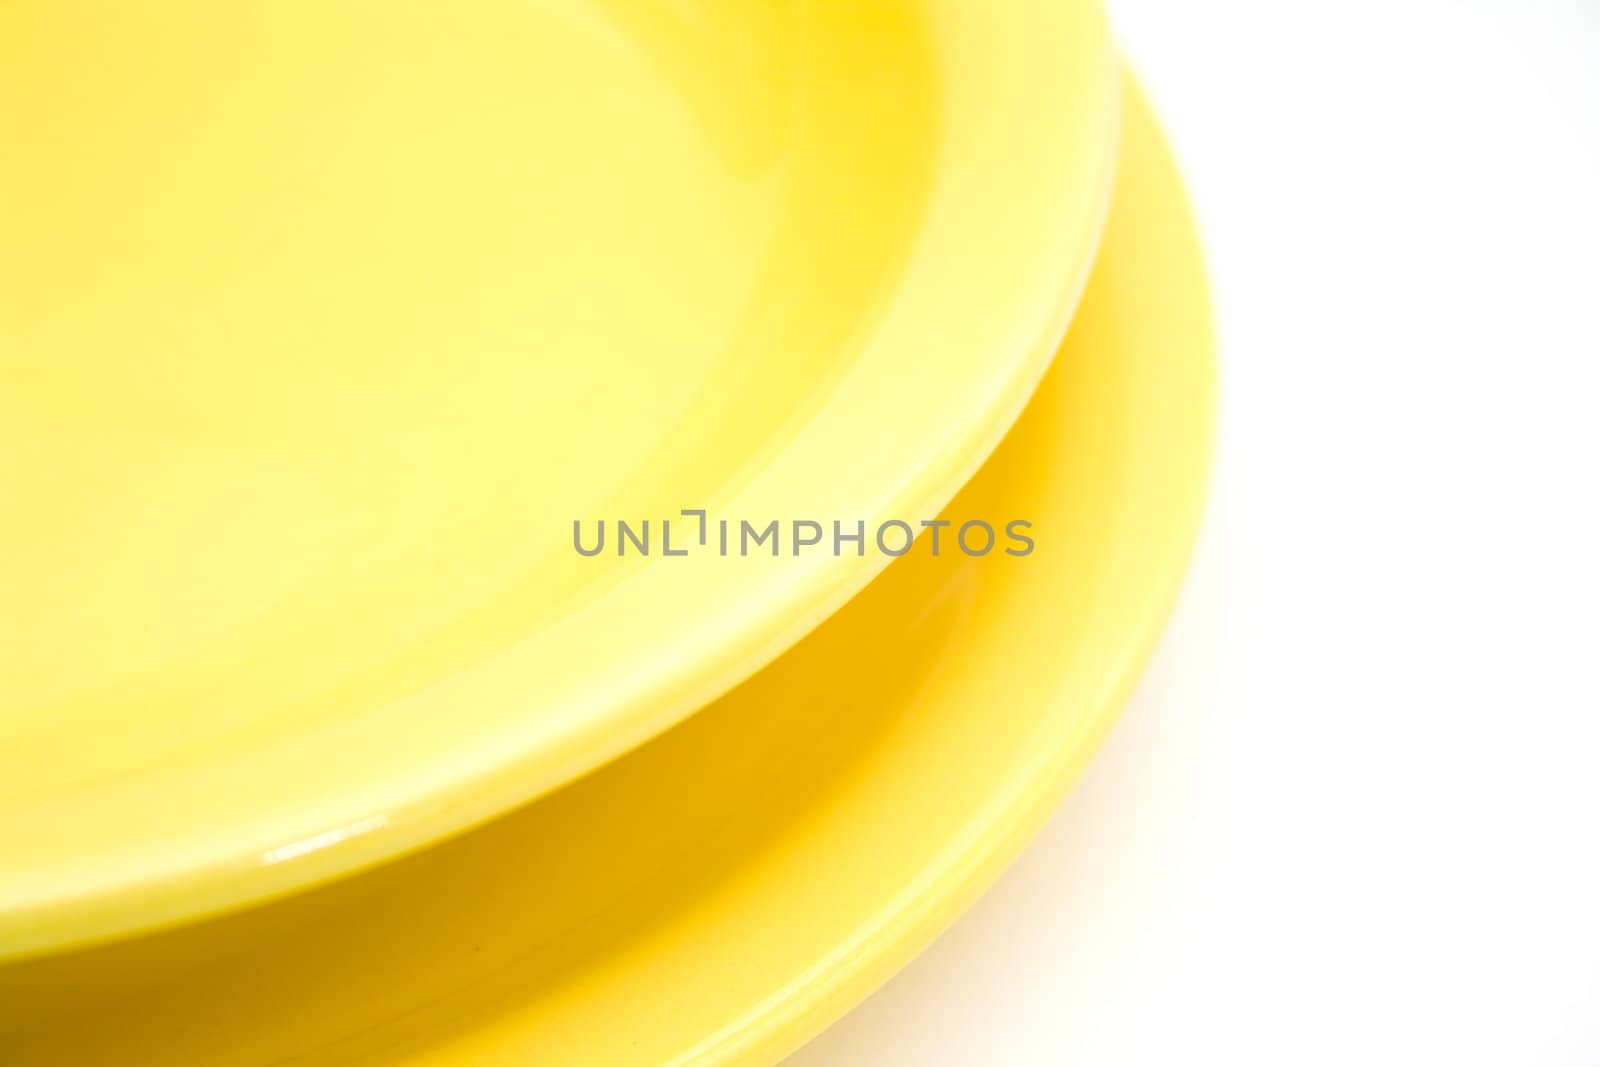 Two yellow plates isolated on white background.